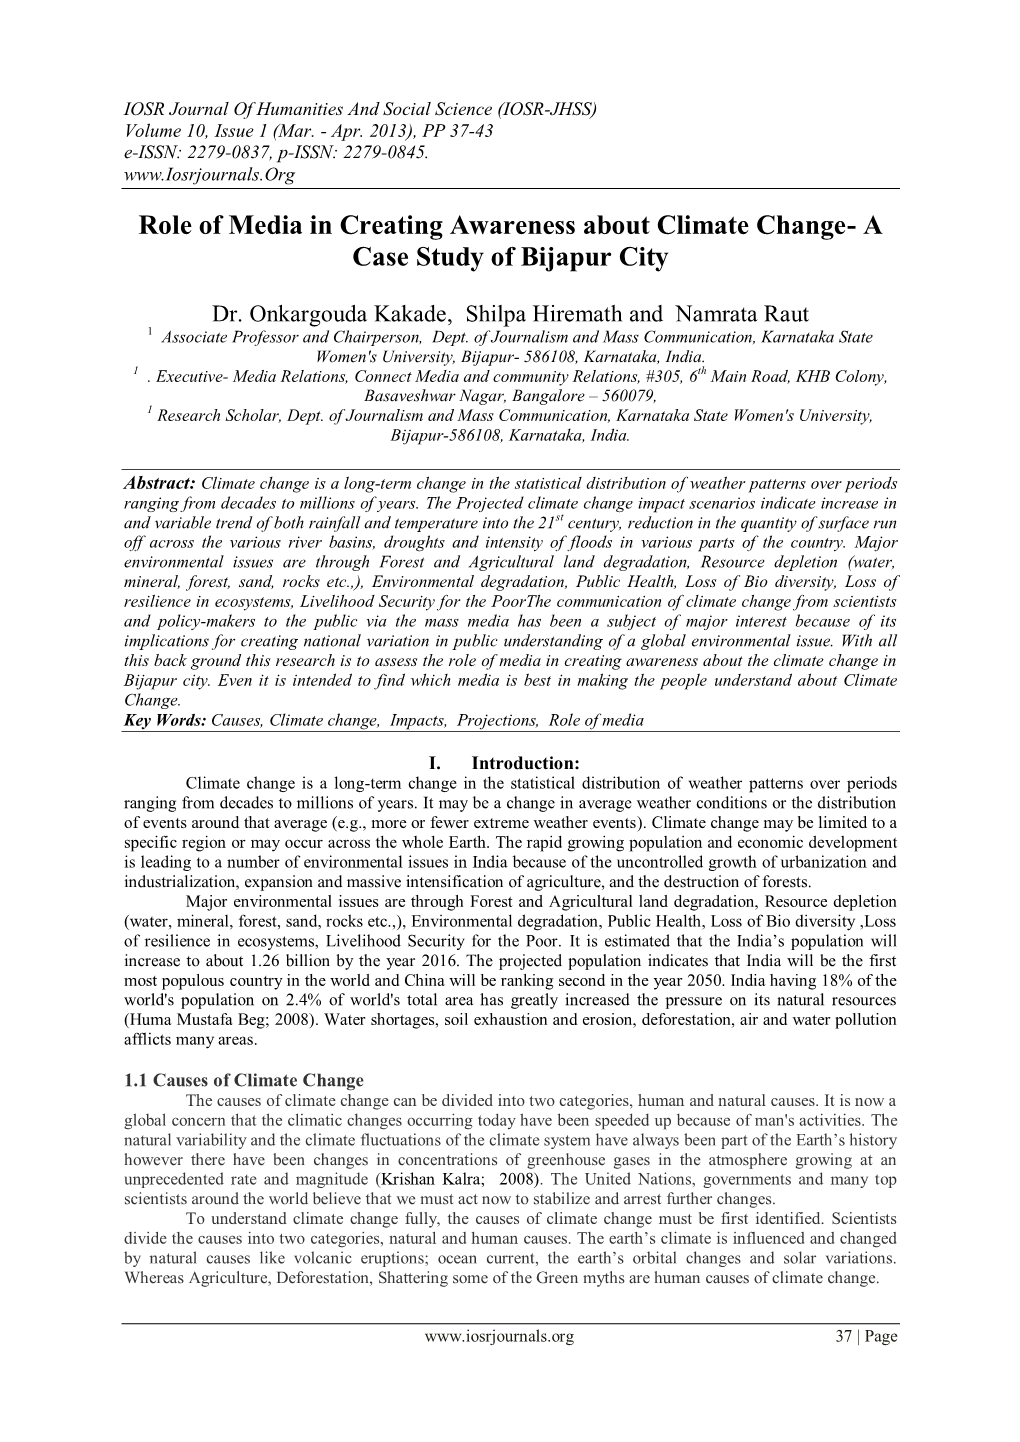 Role of Media in Creating Awareness About Climate Change- a Case Study of Bijapur City